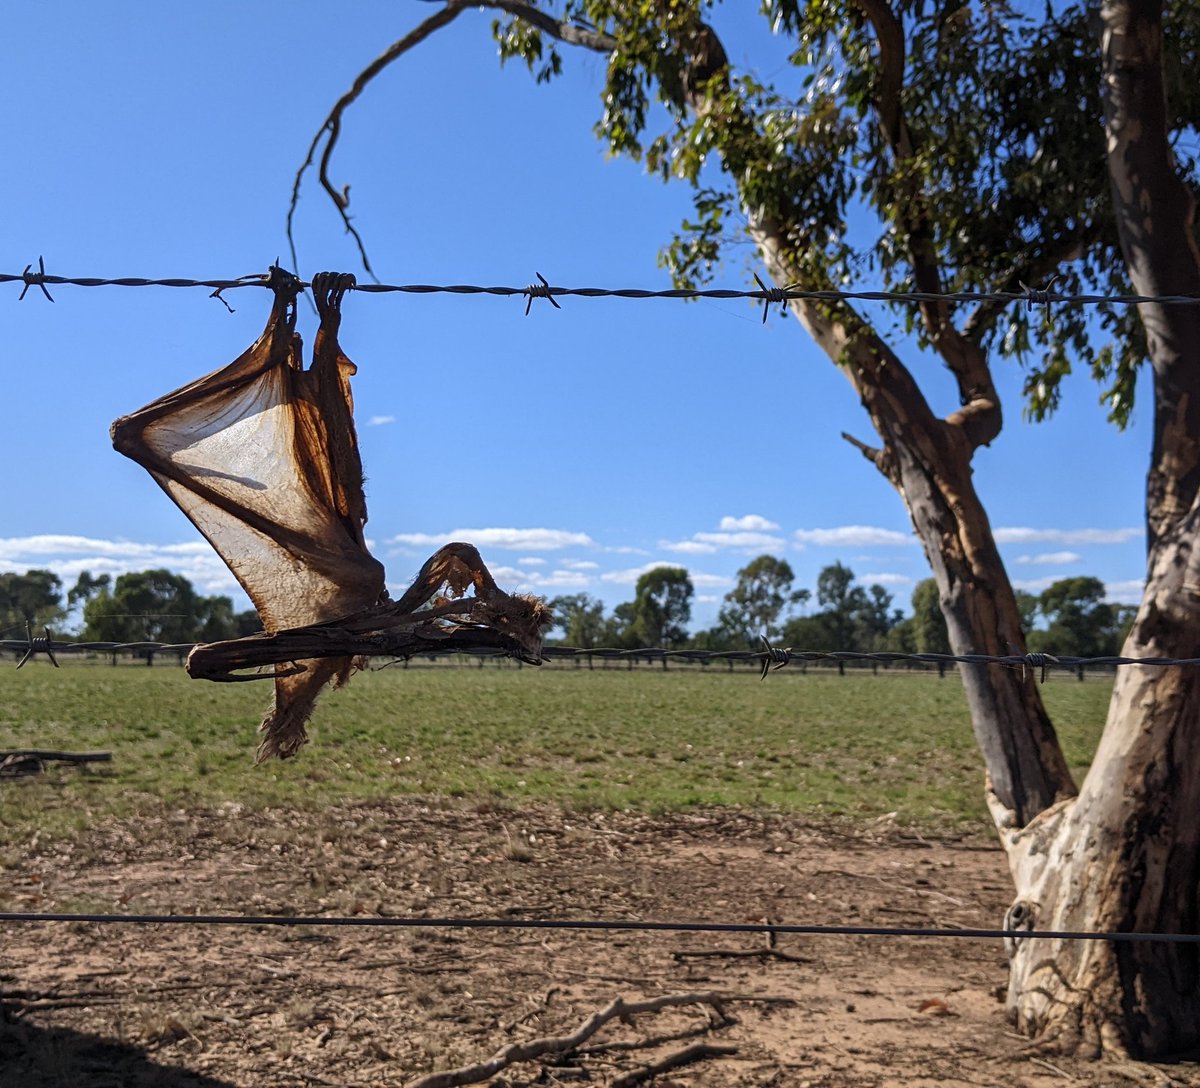 Barbed wire and #wildlife don't mix. My heart aches. While on #fieldwork recently I found 4 deceased native #bats, a few metres from each other. I believe these are Little red #flyingfoxes, semi-permanent residents of northern VIC. @AusMammals #WildOz #conservation #ecology